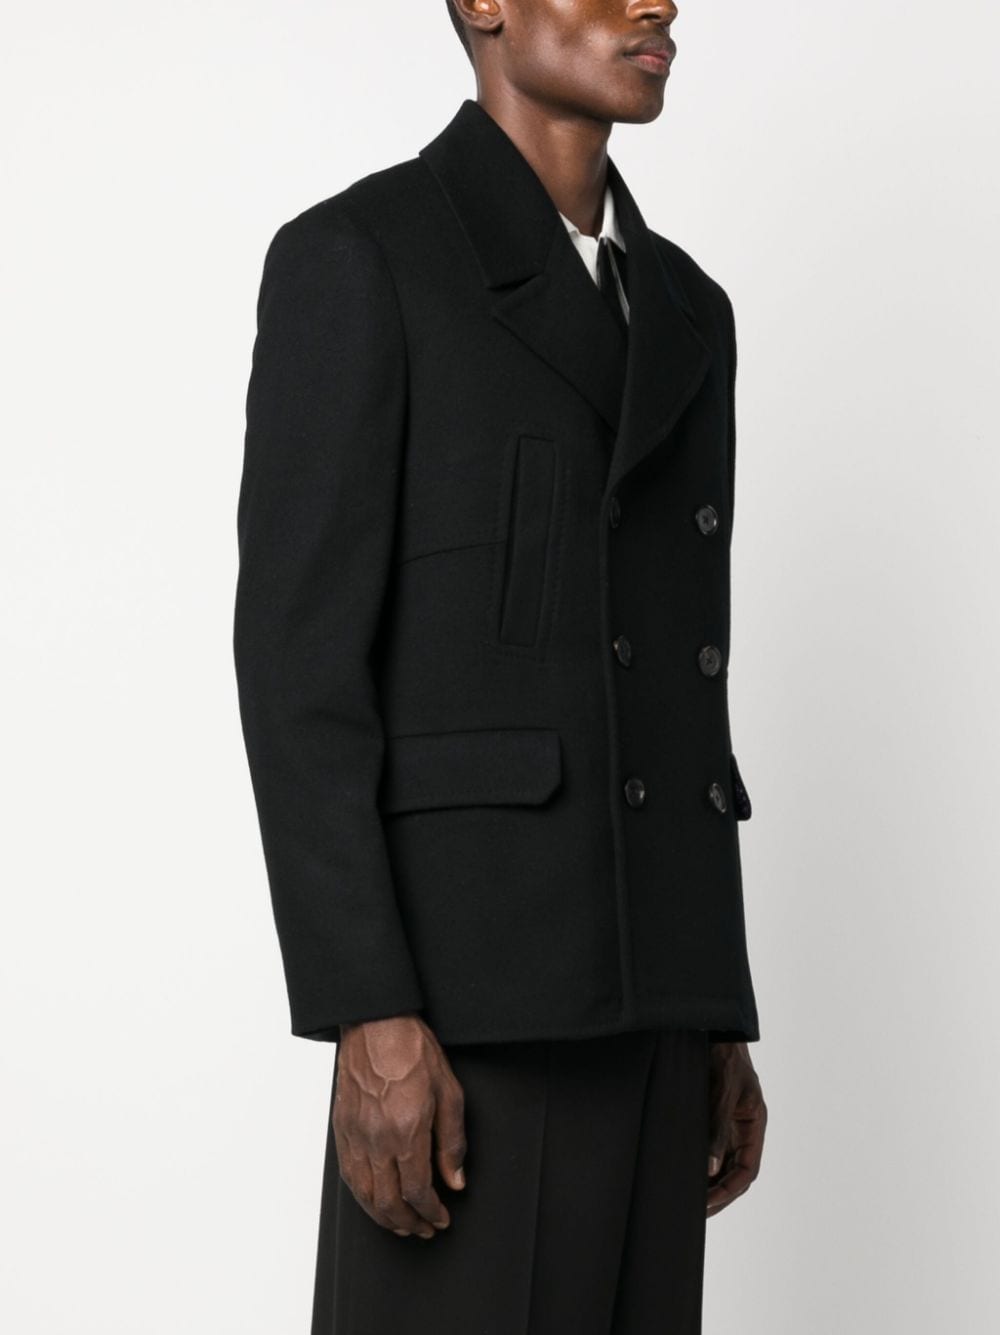 PAUL SMITH Classic Wool and Cashmere Double-Breasted Blazer for Men